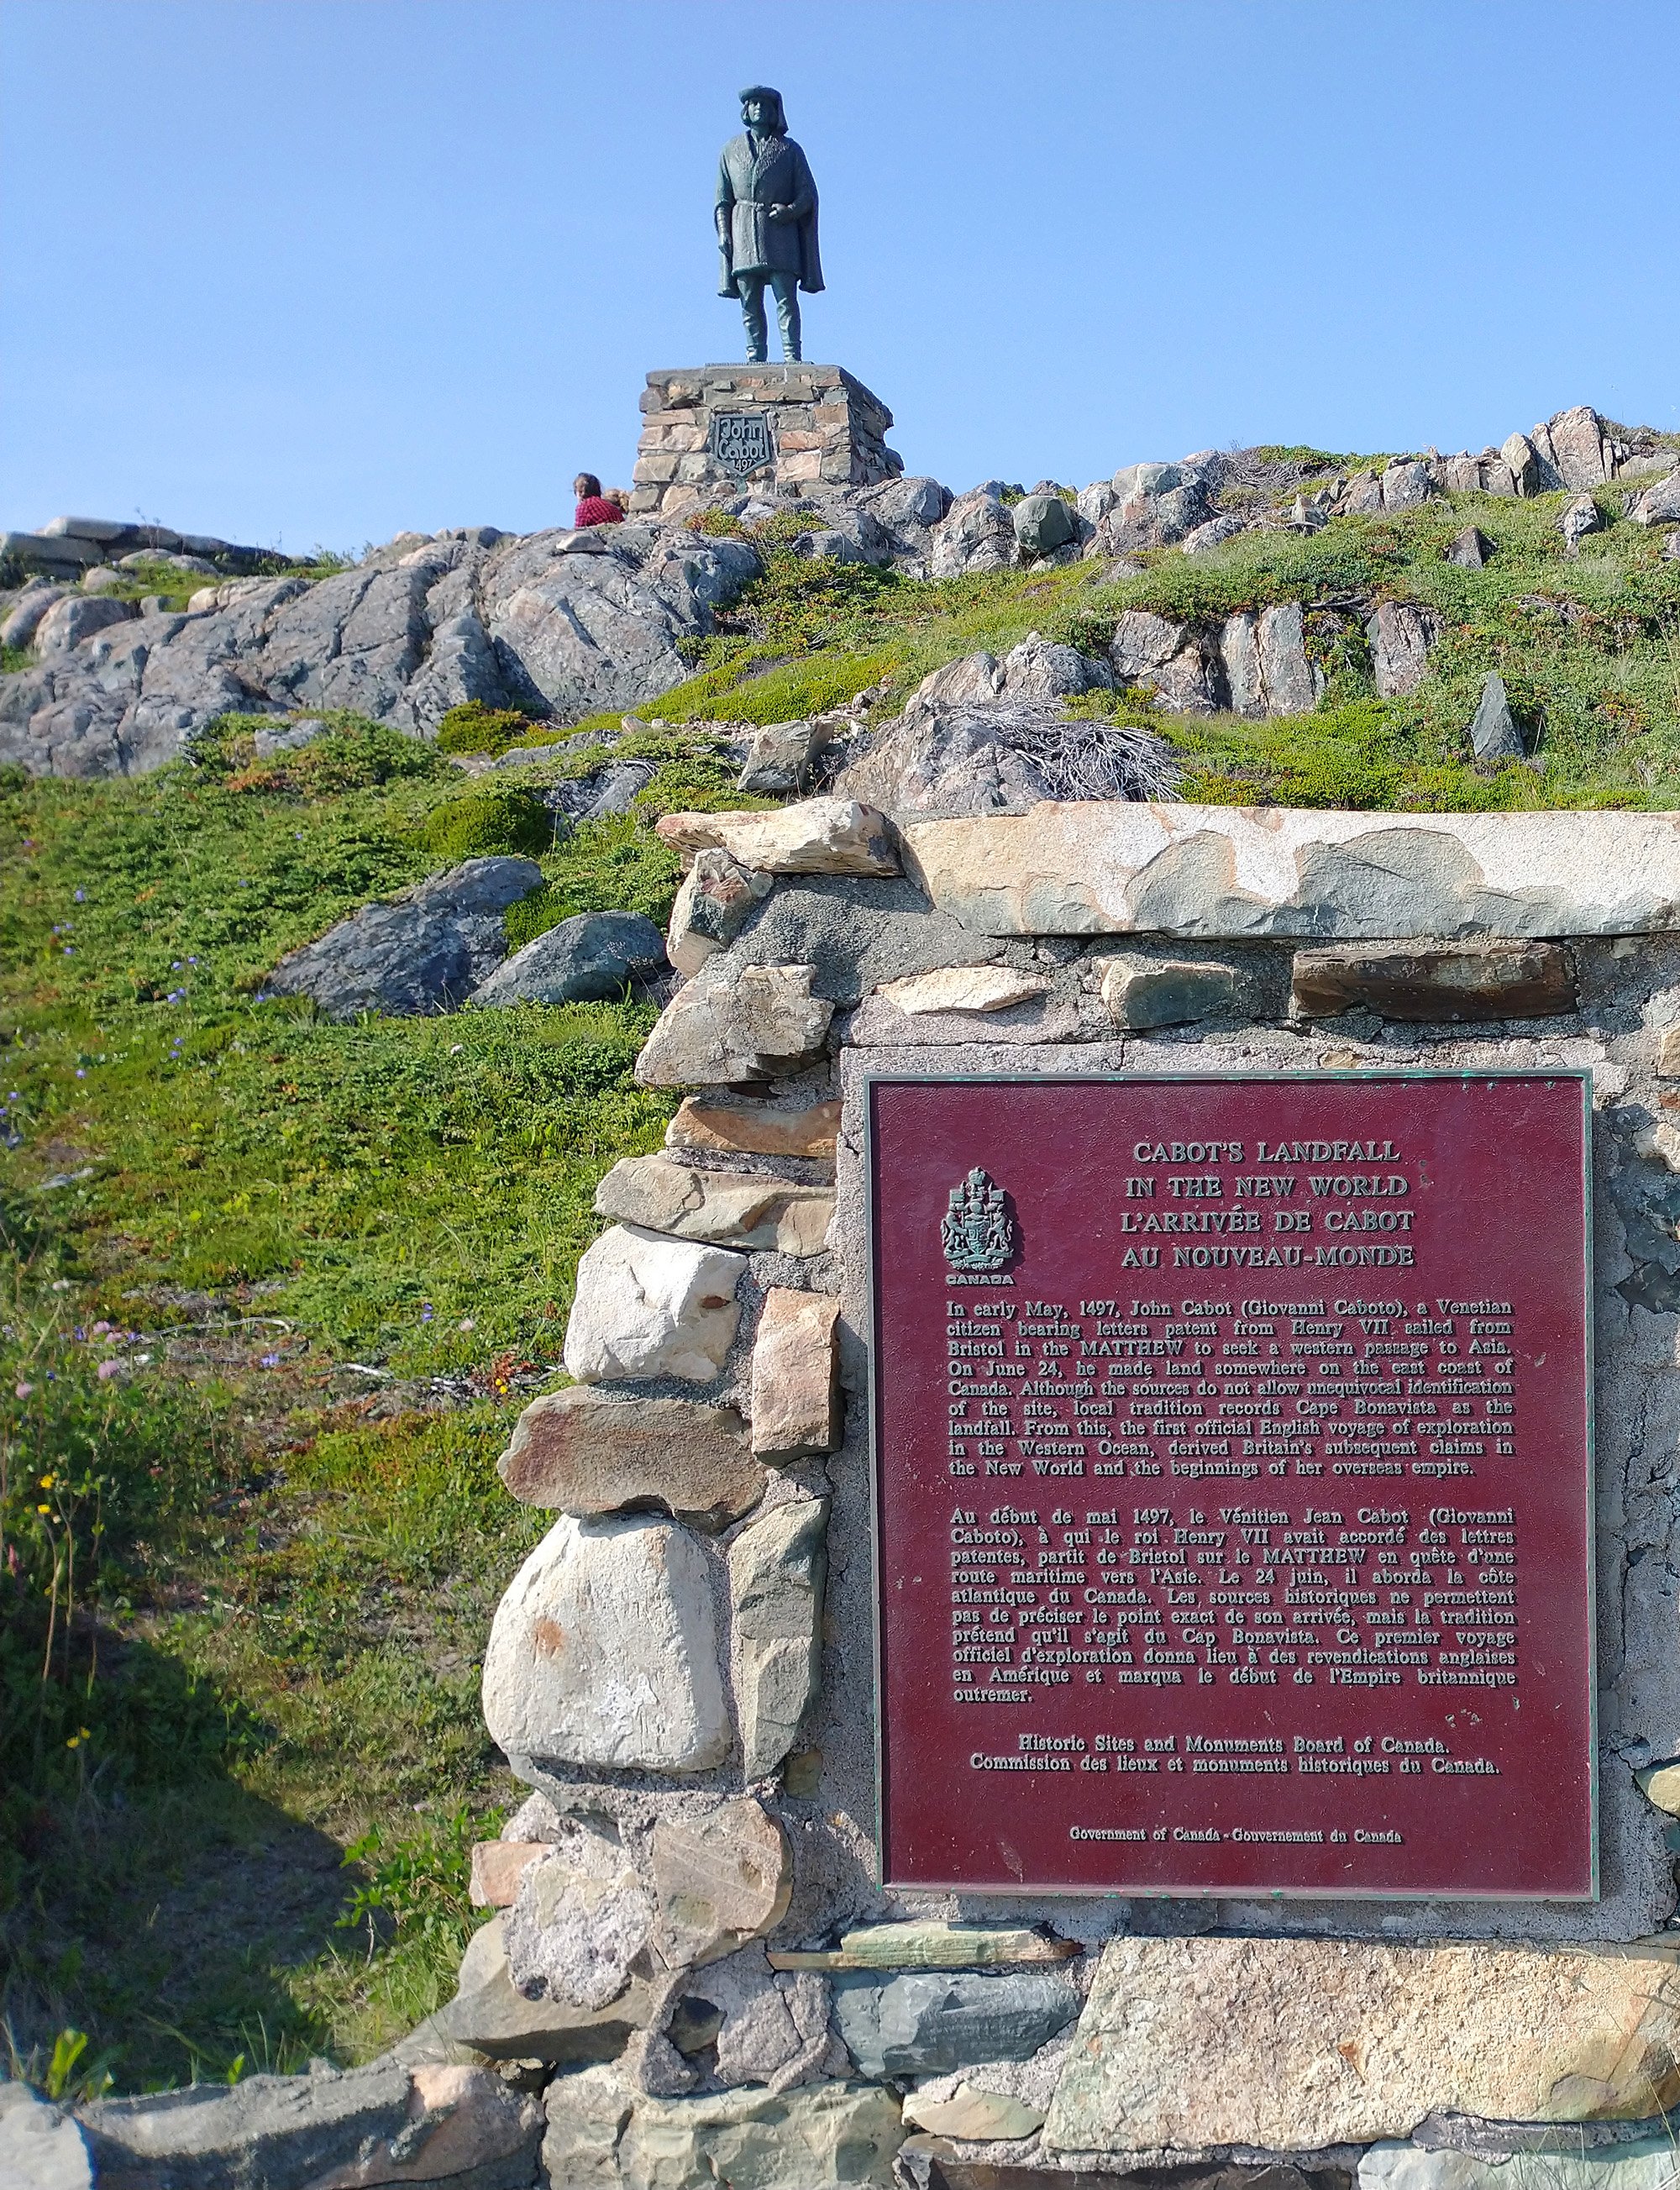 They also put up a statue of John Cabot, with a little plaque. I'm sure CBC news is angry at this statue and wants to take it down.